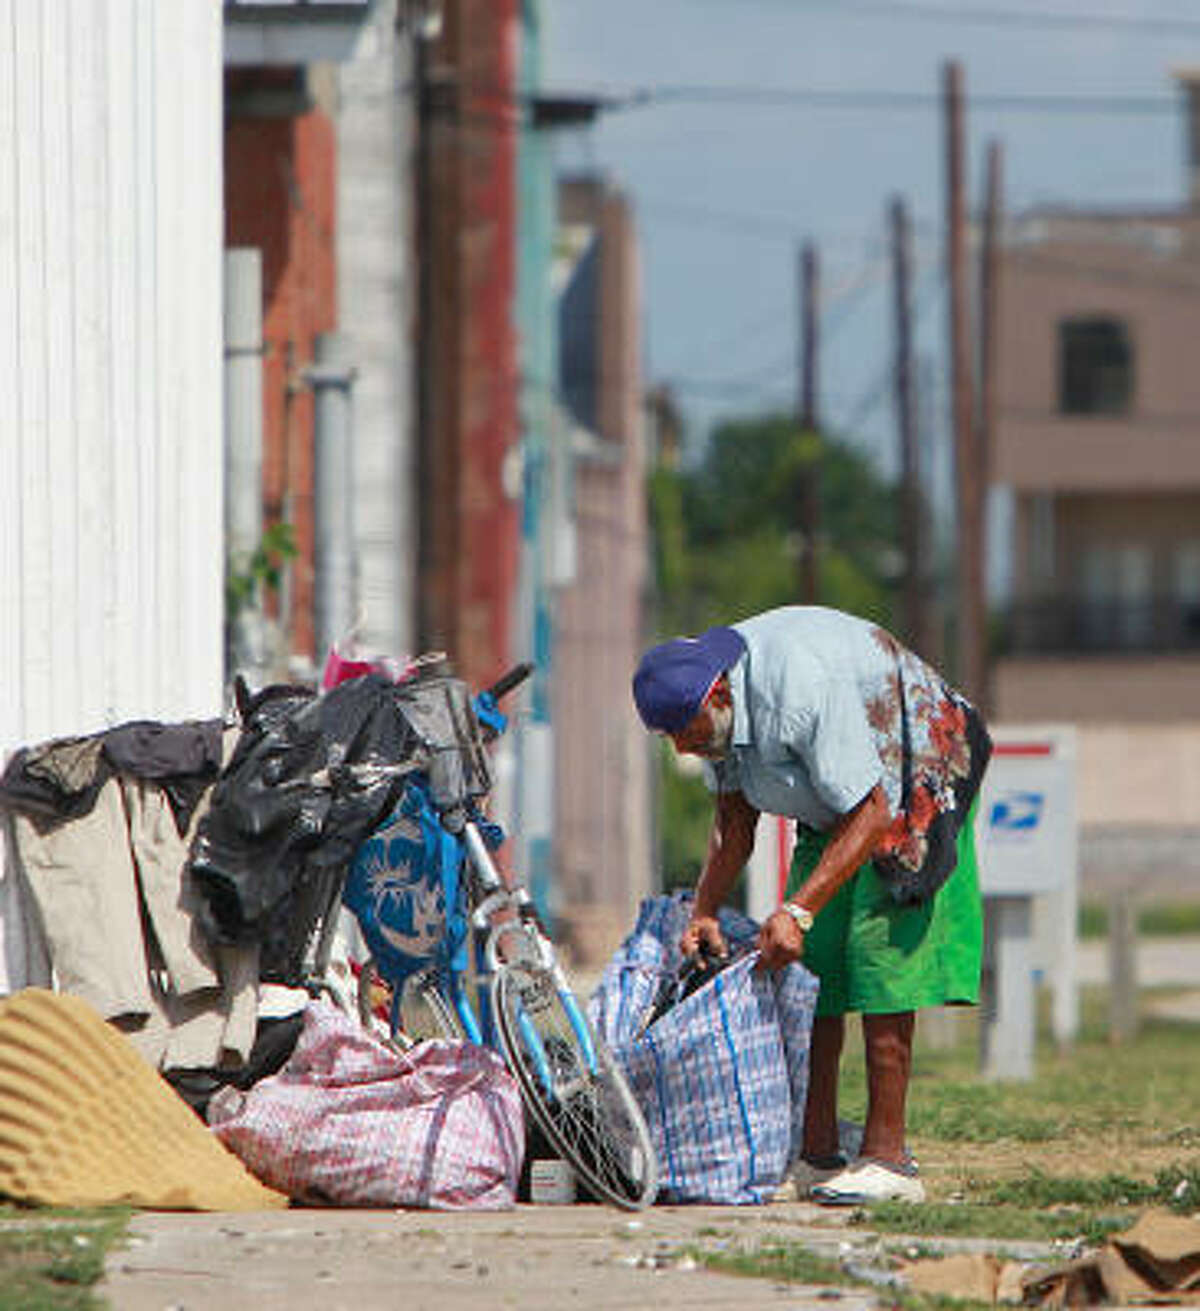 C.J. stows his belongings at a corner along St. Emmanuel and Congress on Wednesday. East Downtown residents have petitioned to have their neighborhood added to the city's anti-loitering ordinance, which prohibits sleeping on sidewalks.